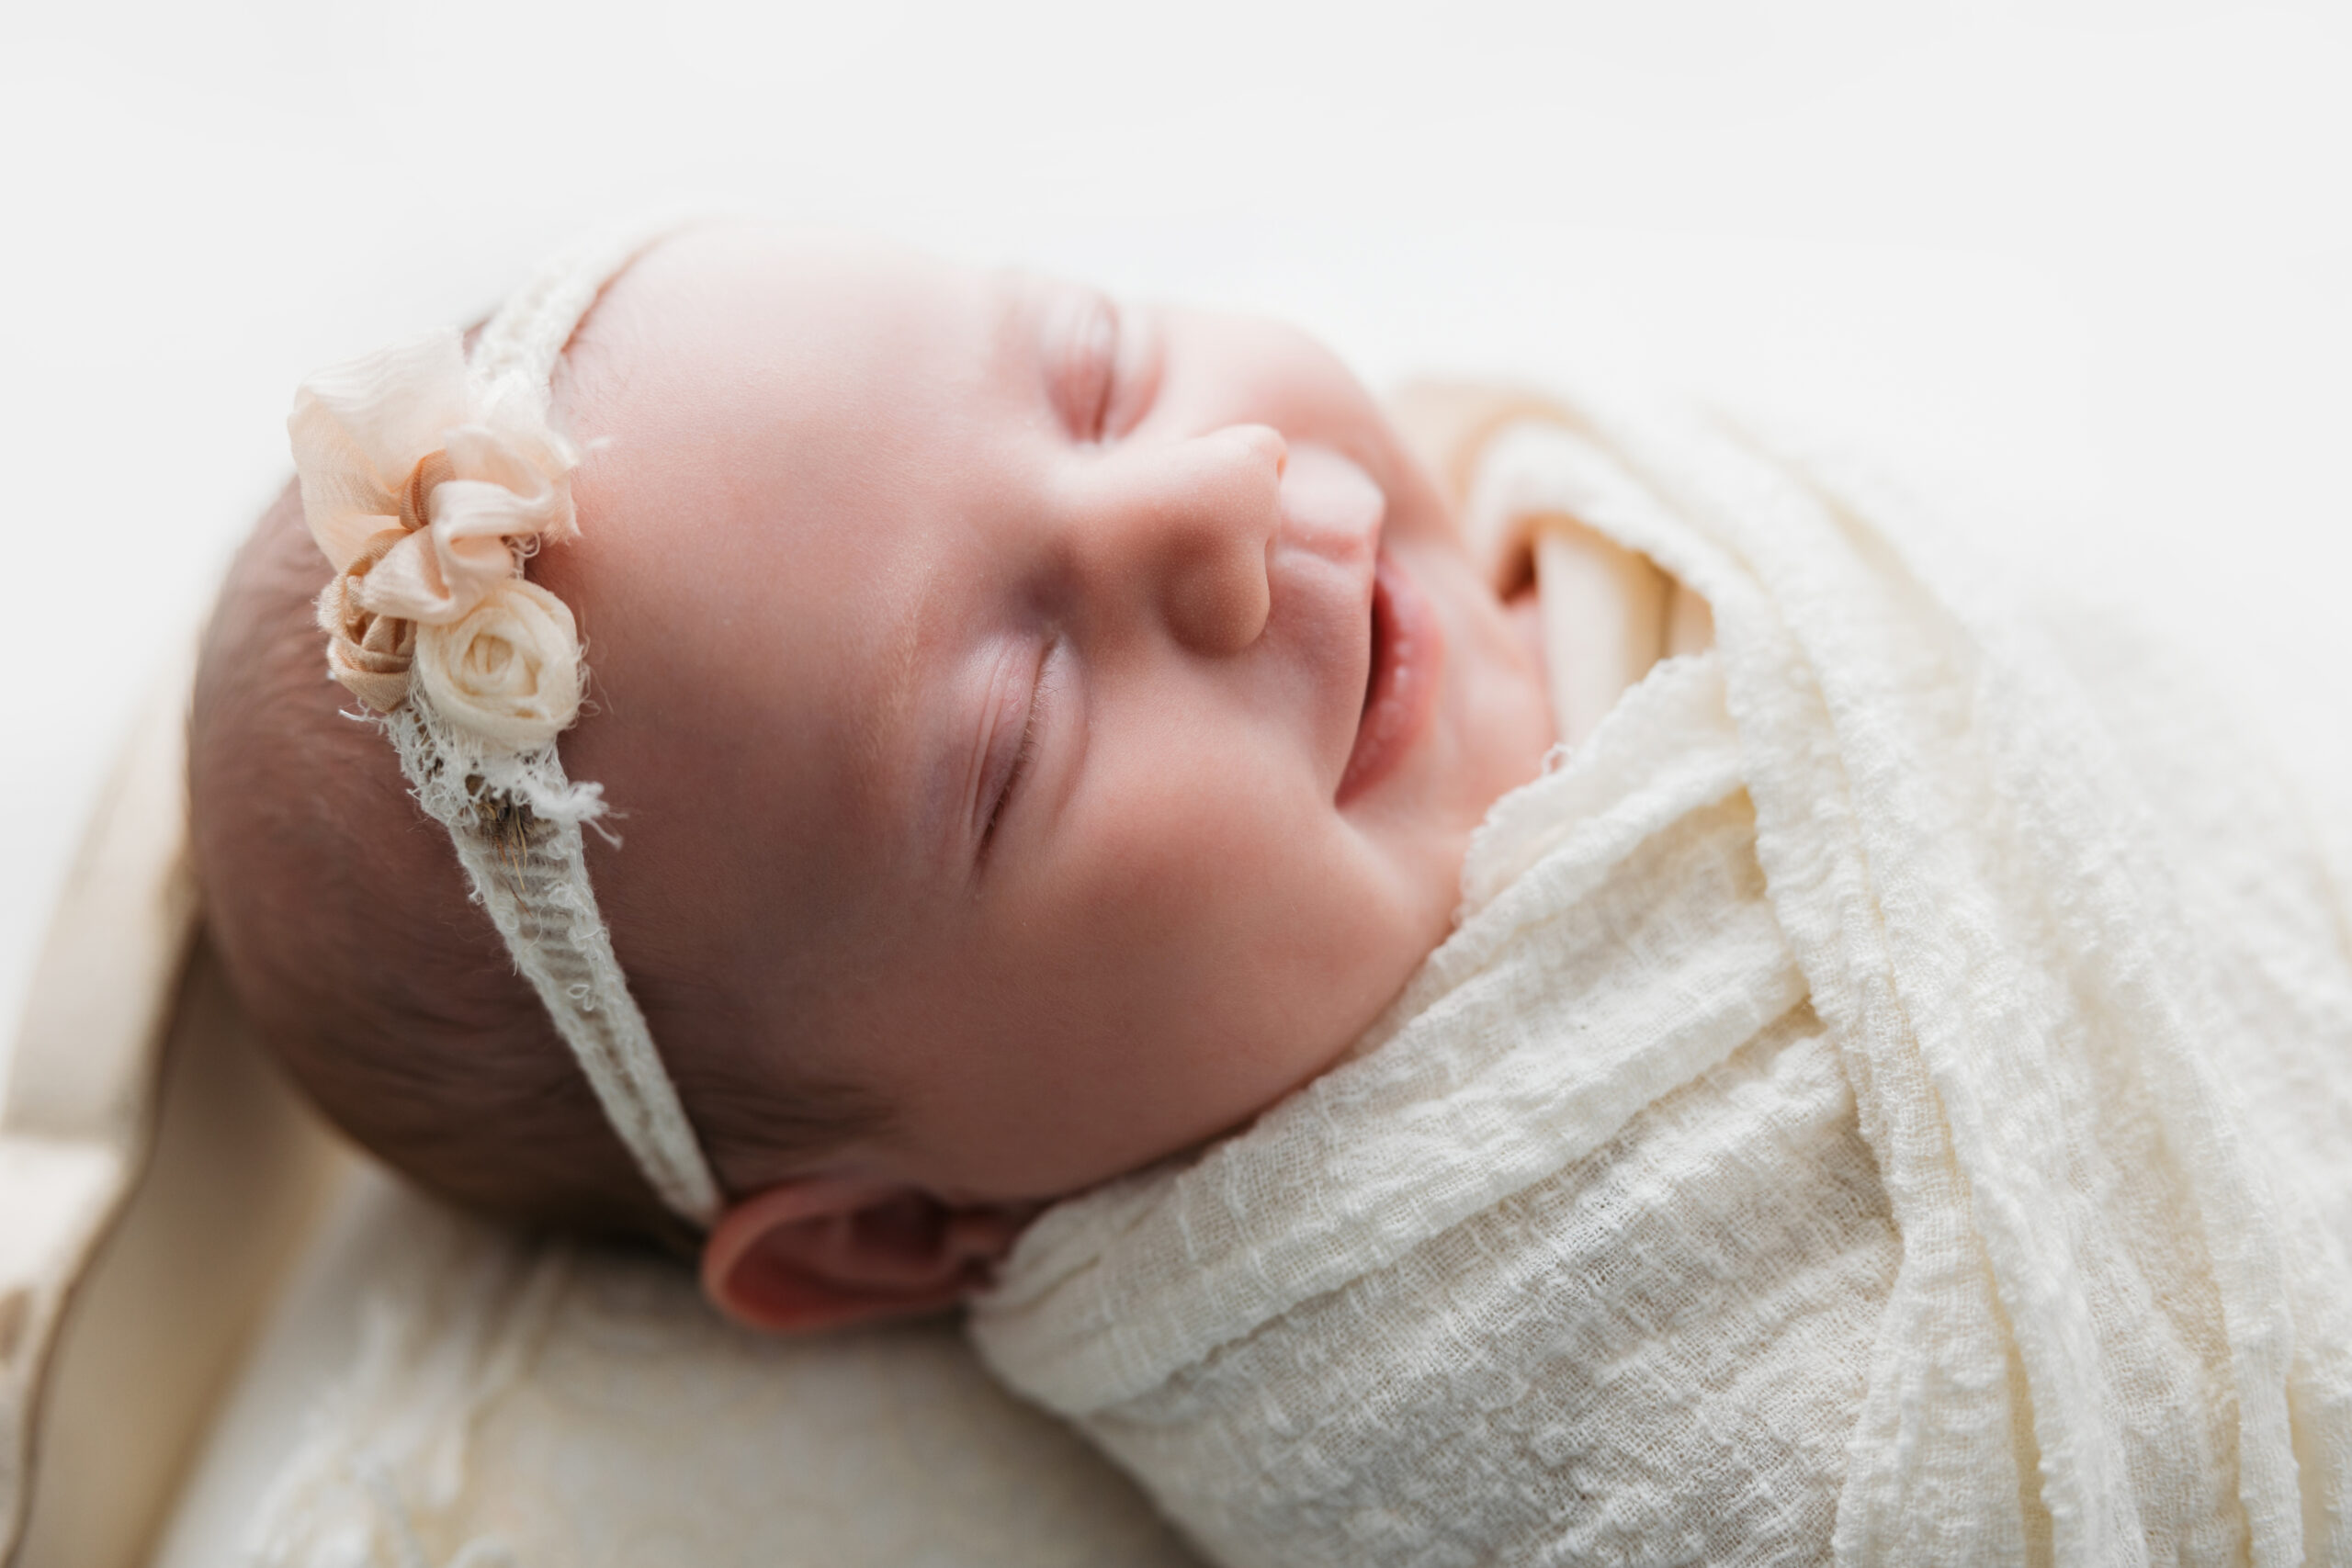 Newborn baby smiling in sleep, wrapped in a delicate cream swaddle with a floral headband